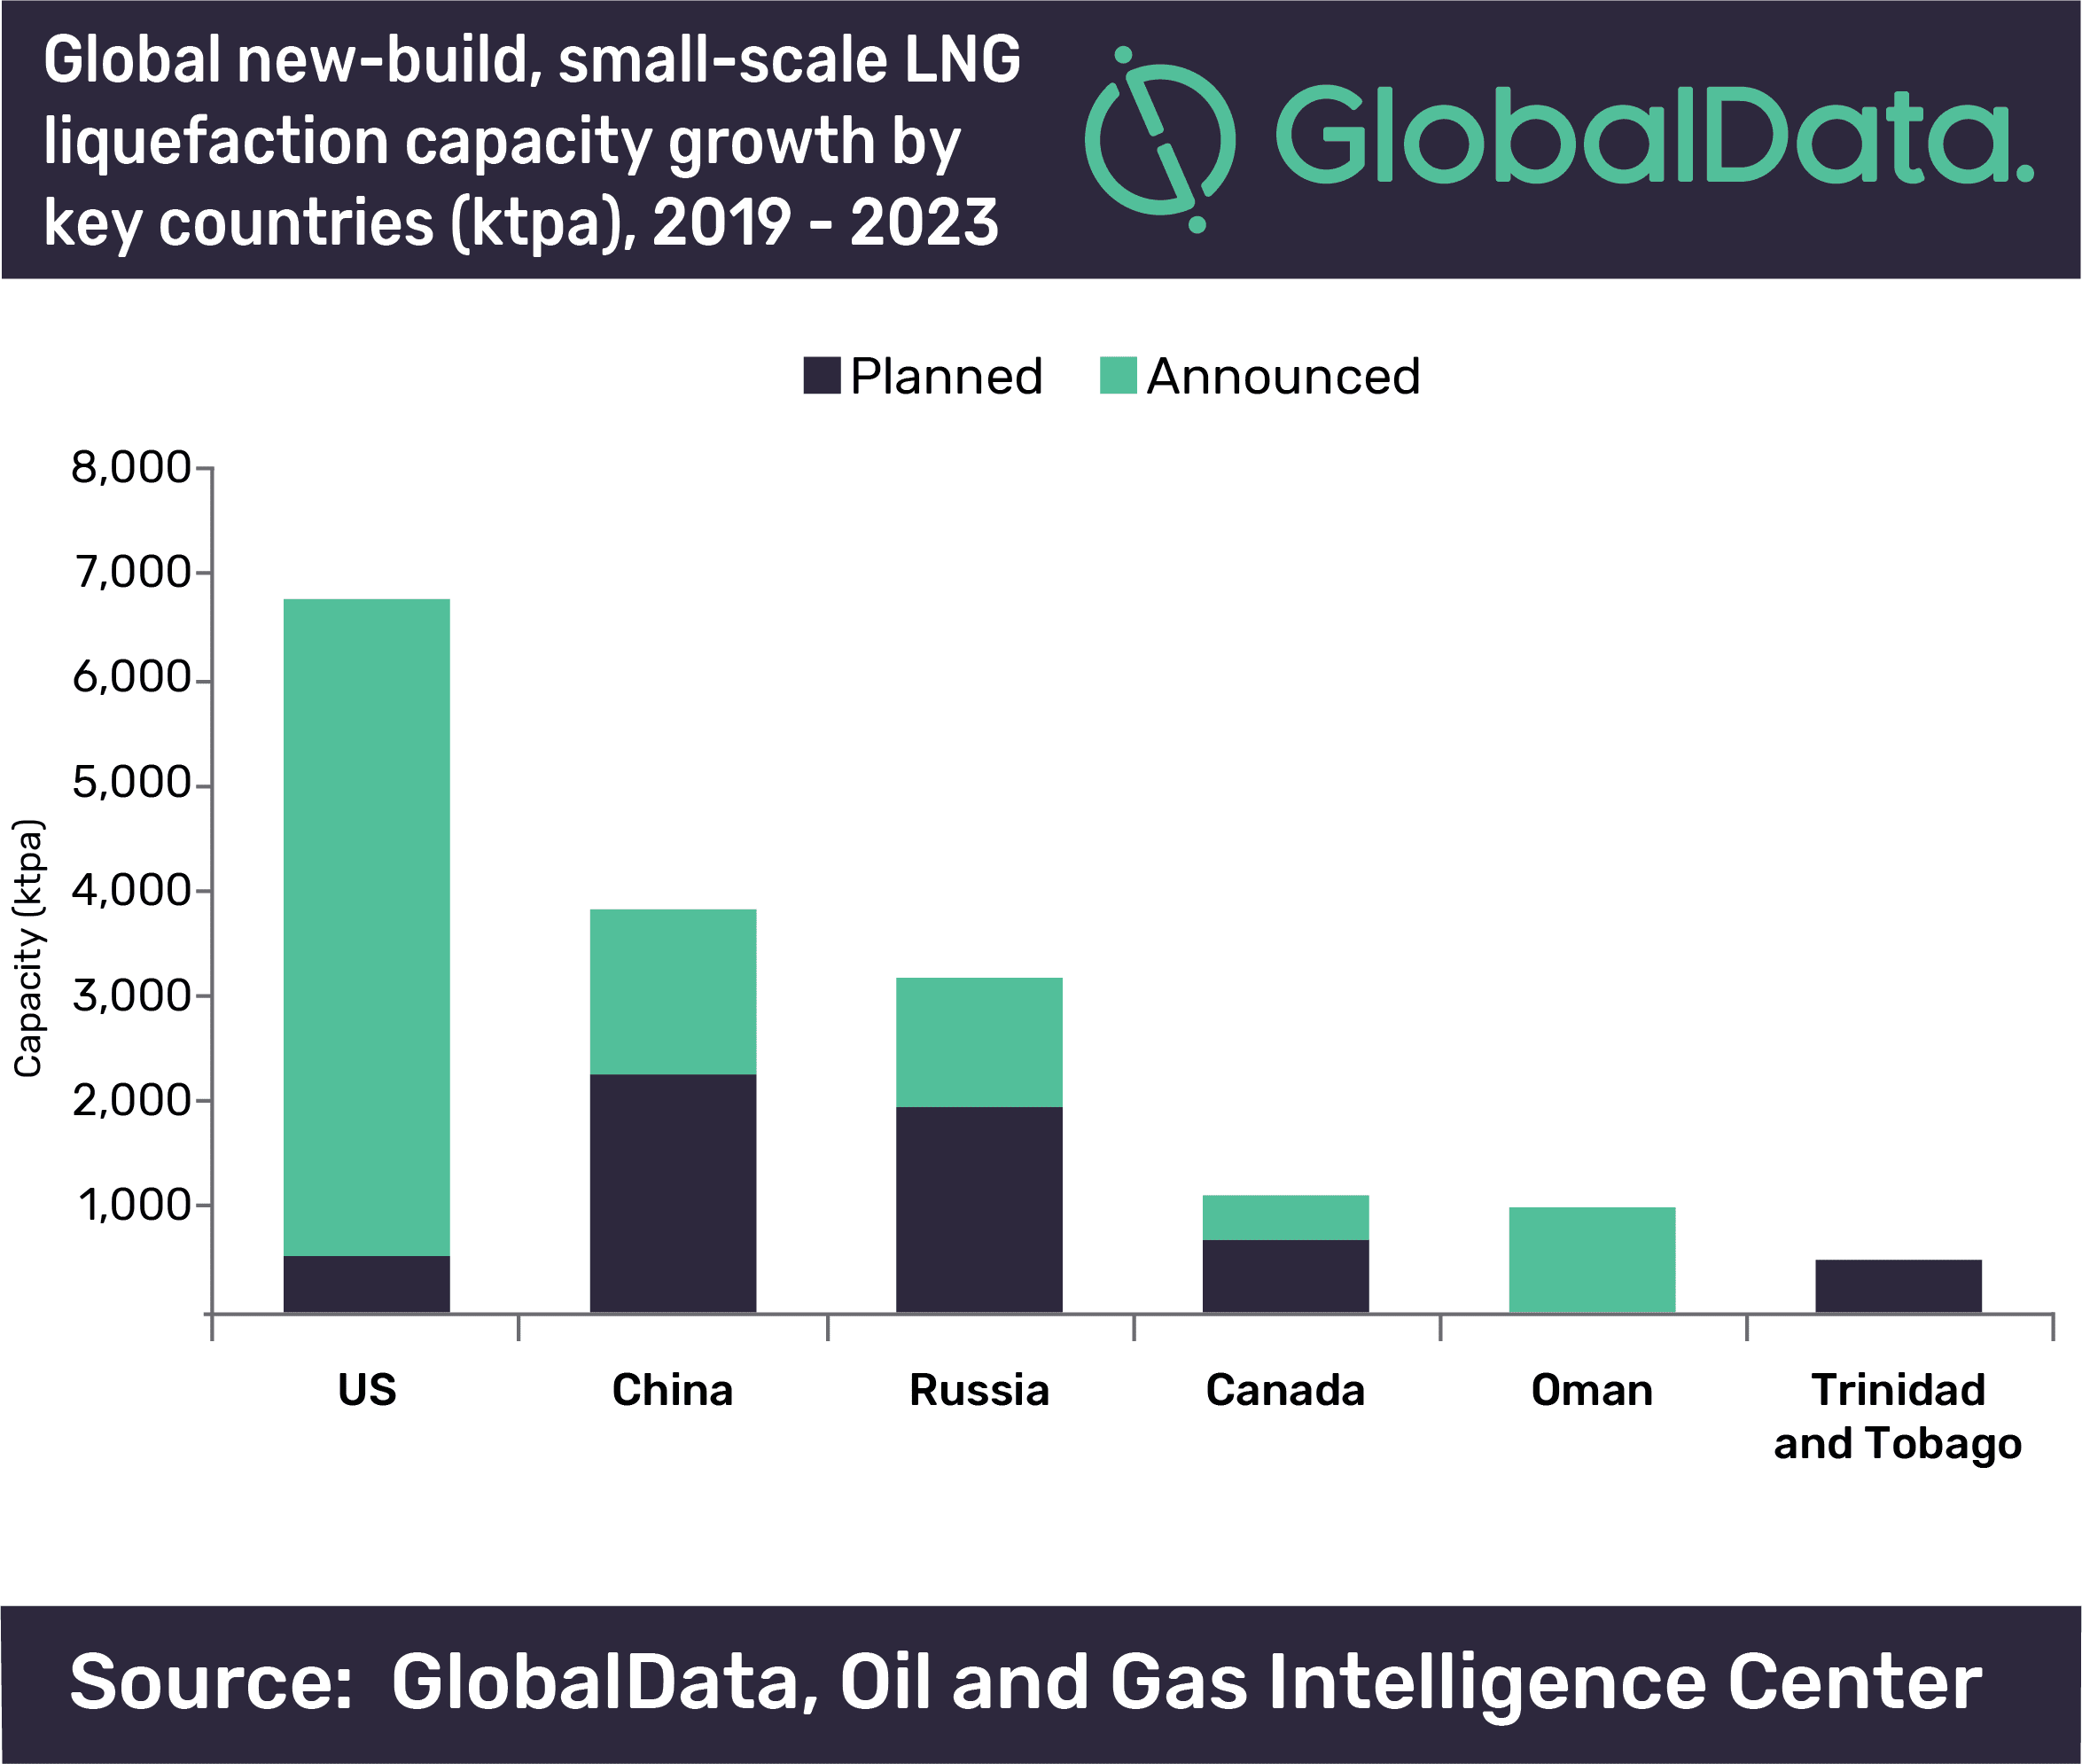 US to contribute 40% of global new-build small-scale LNG liquefaction capacity additions by 2023